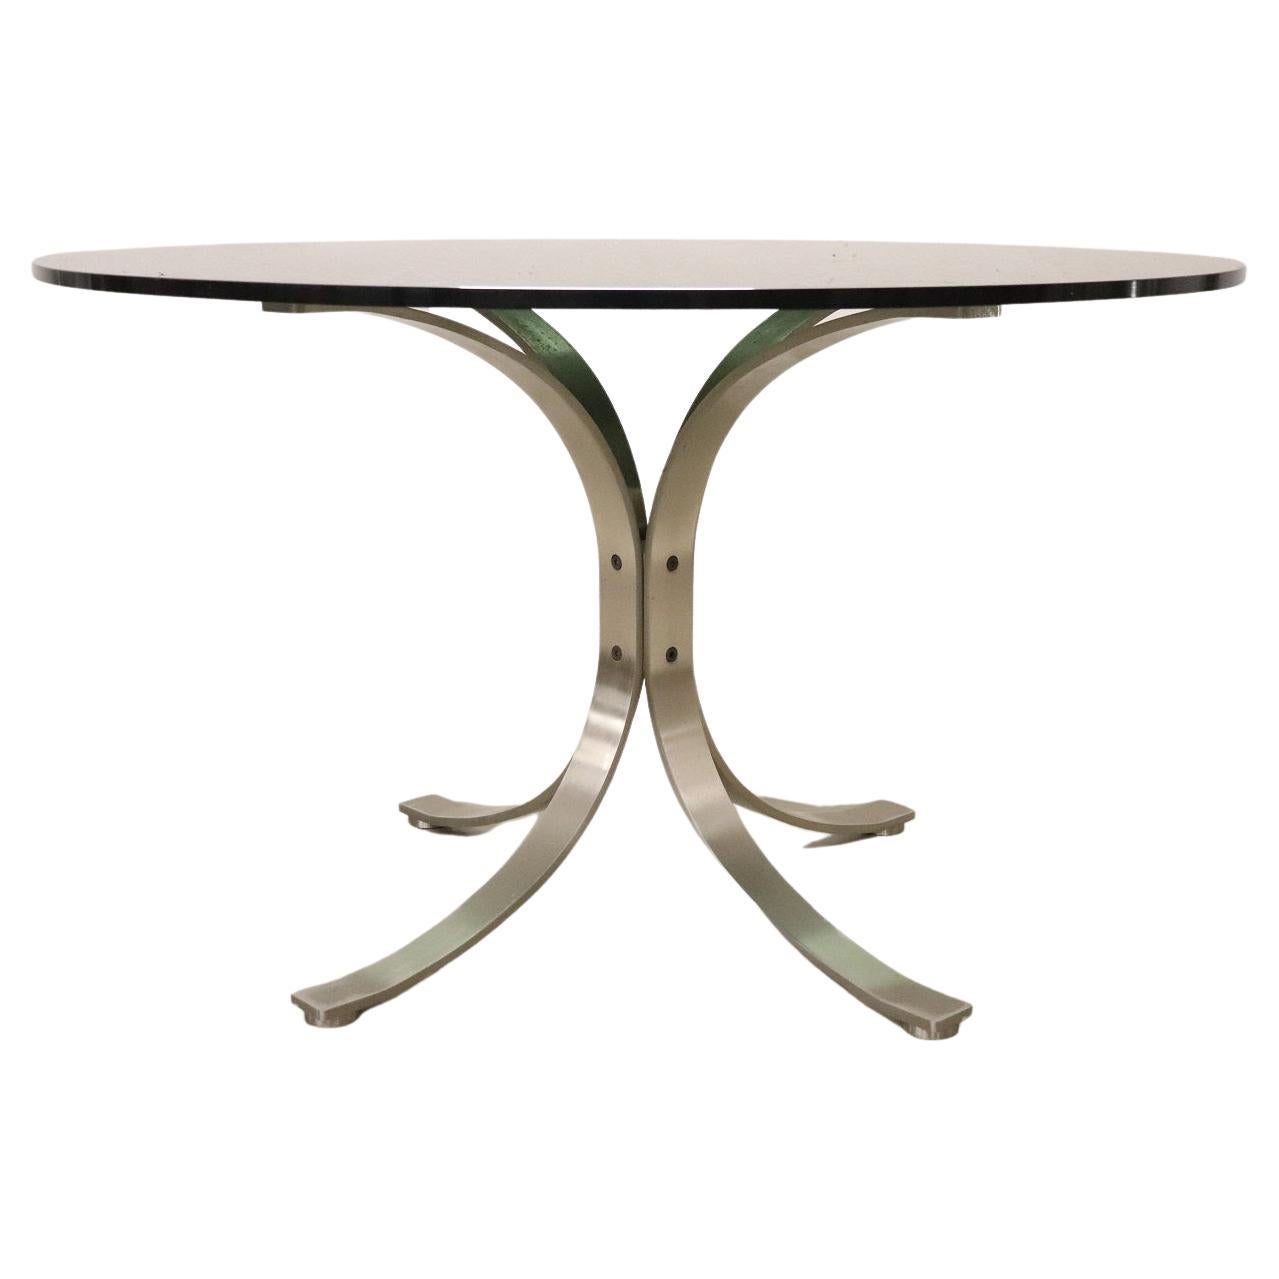 Italian Design Steel and Smoked Glass Top Round Dining Table, 1970s